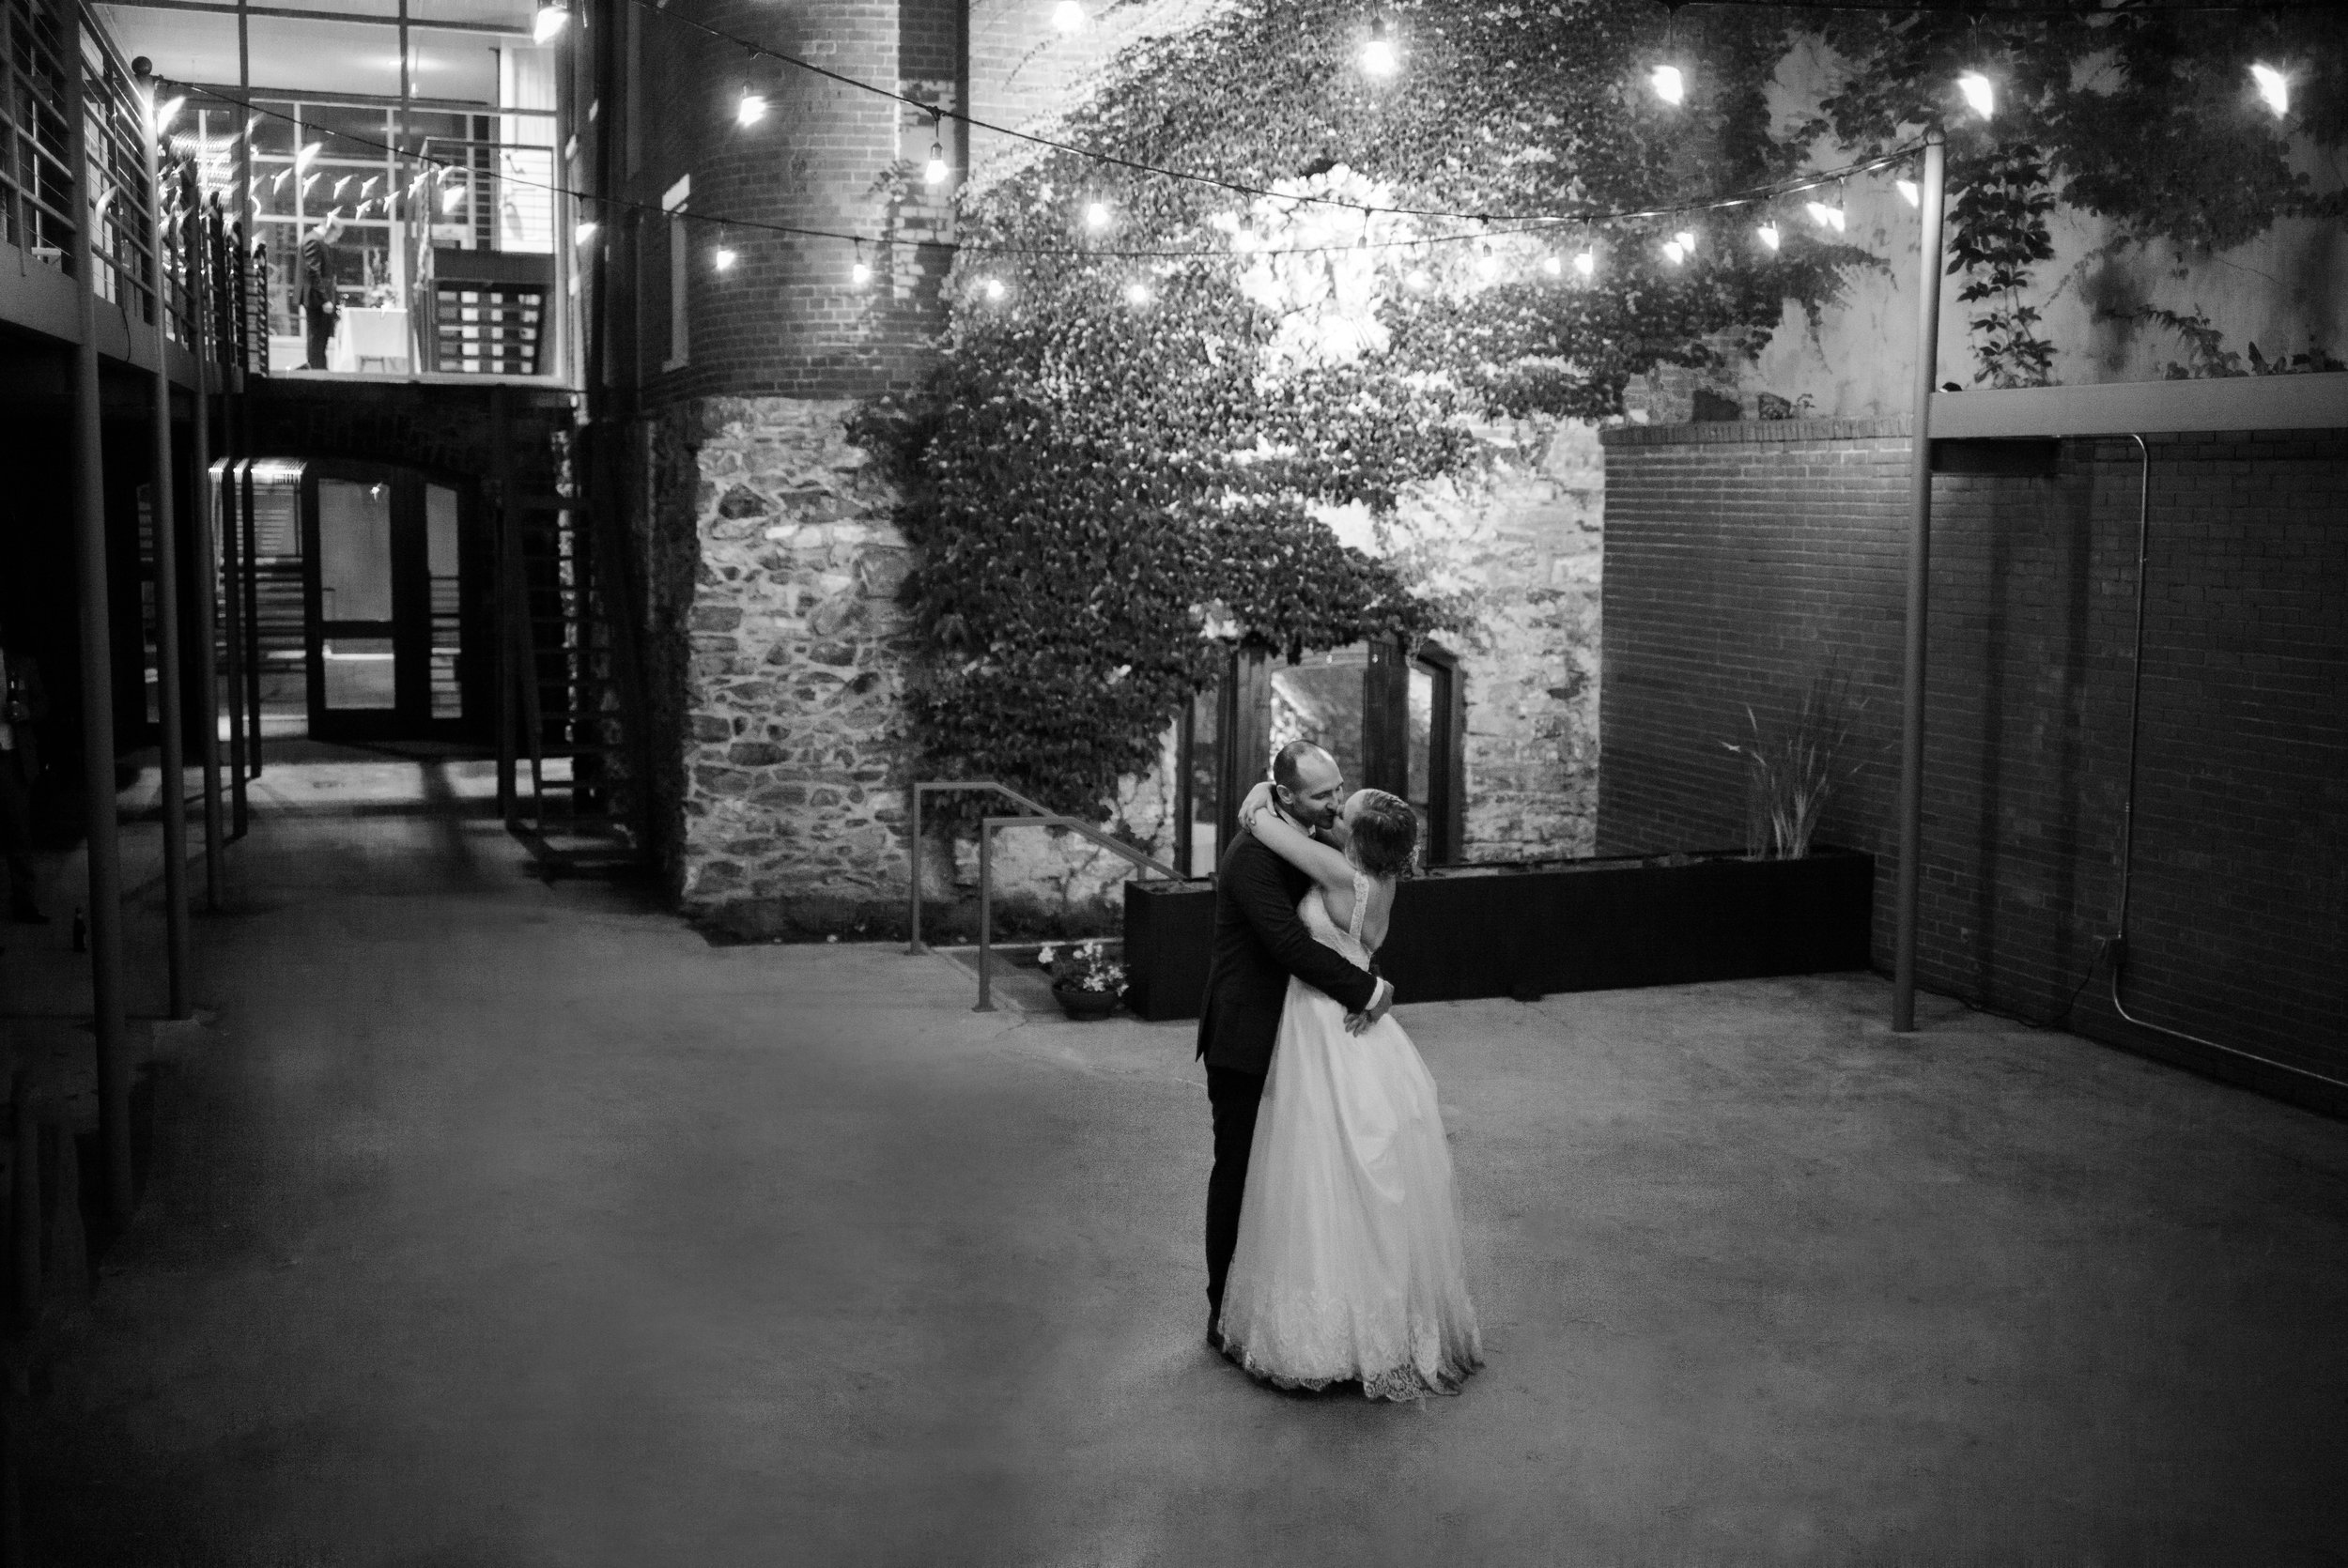 Bride and groom dancing in Garden Courtyard in black and white